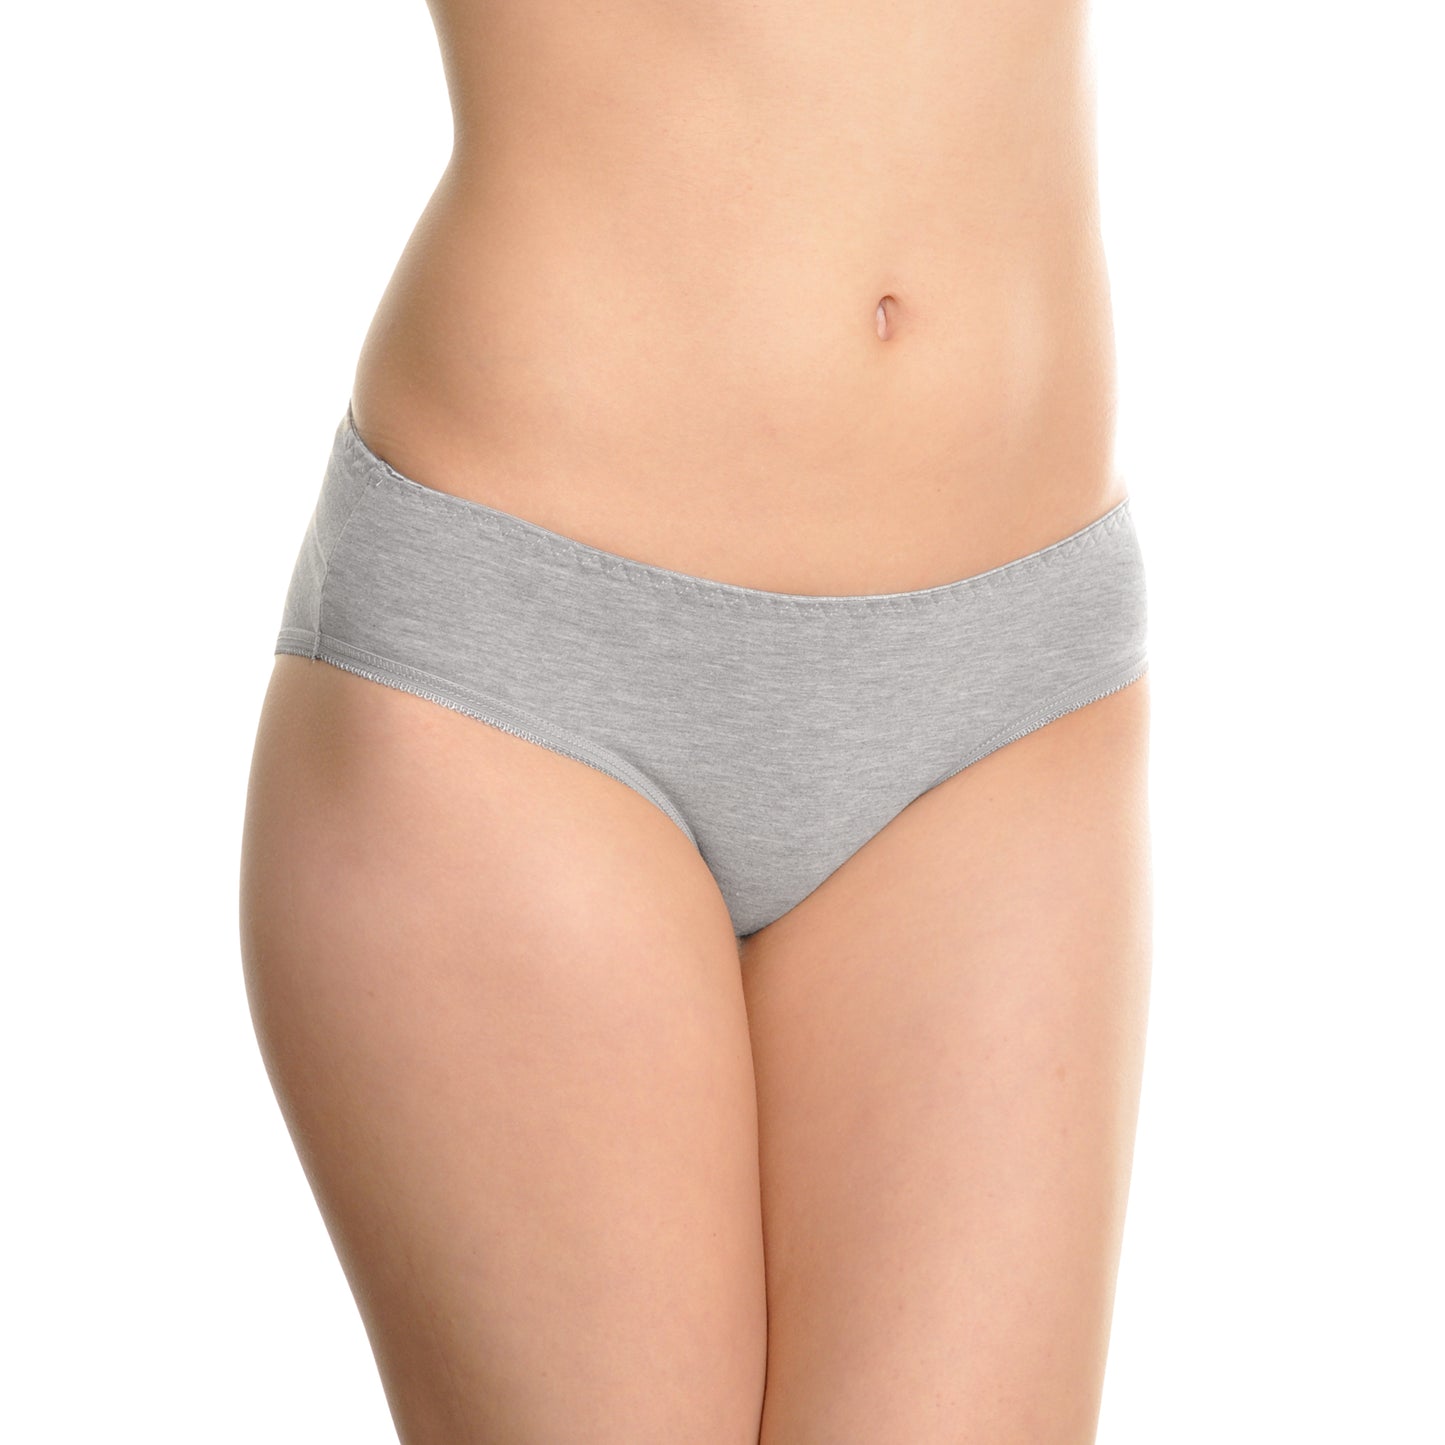 Angelina Cotton Bikini Panties with Ruched Center Back –